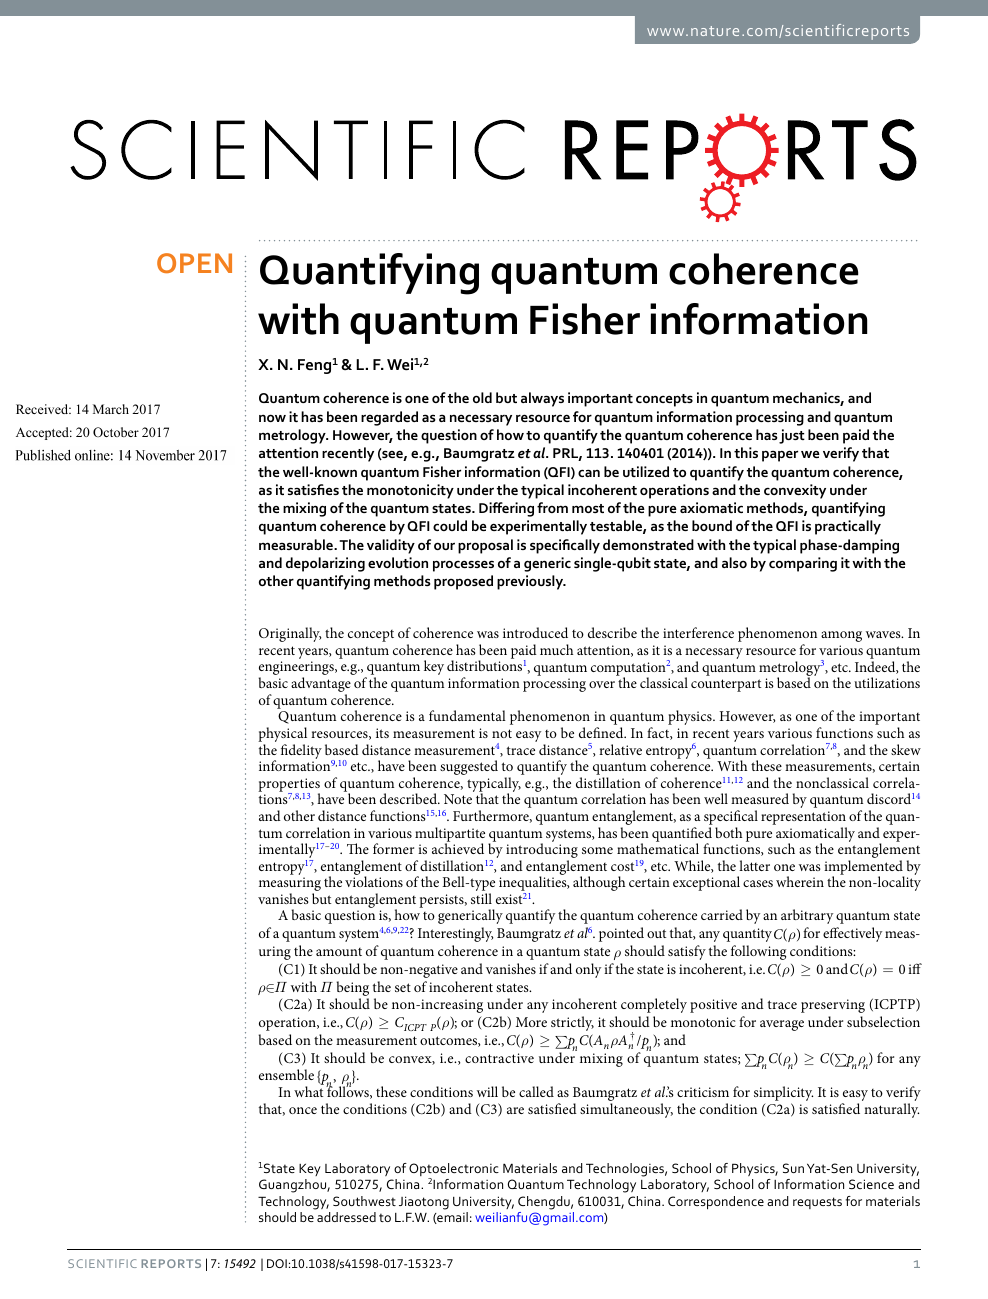 Quantifying Quantum Coherence With Quantum Fisher Information Topic Of Research Paper In Nano Technology Download Scholarly Article Pdf And Read For Free On Cyberleninka Open Science Hub